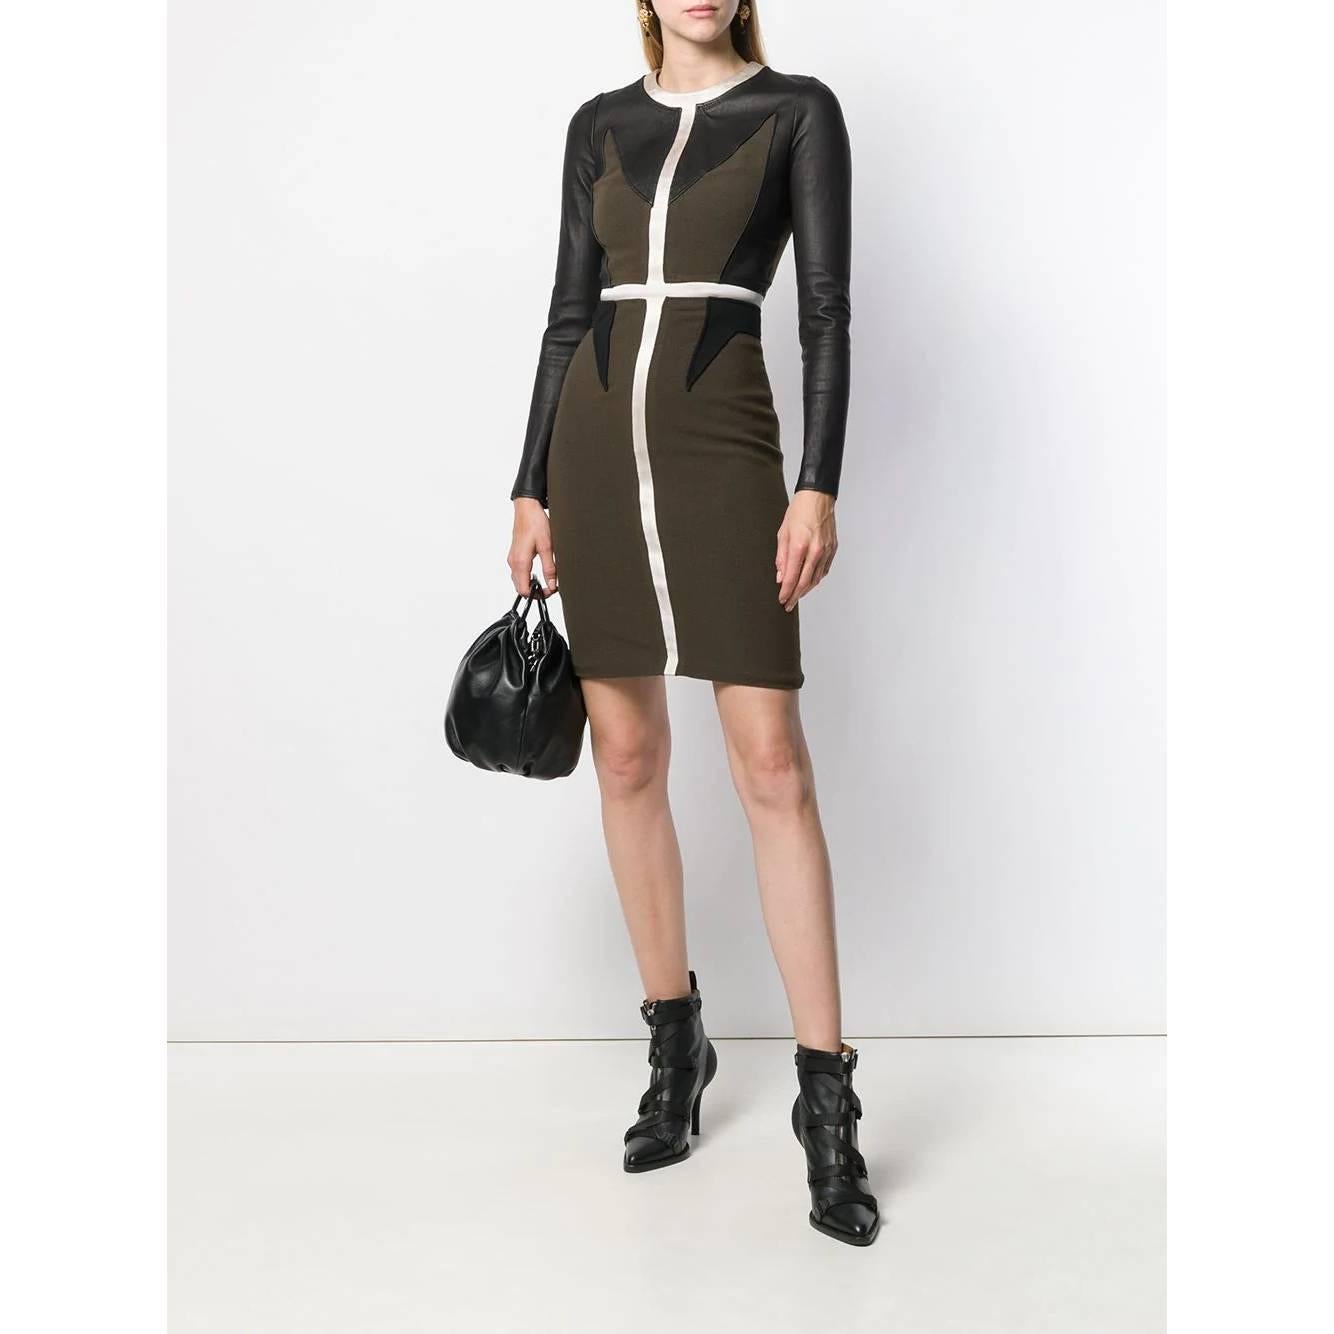 2000s Givenchy Color Block Dress 1